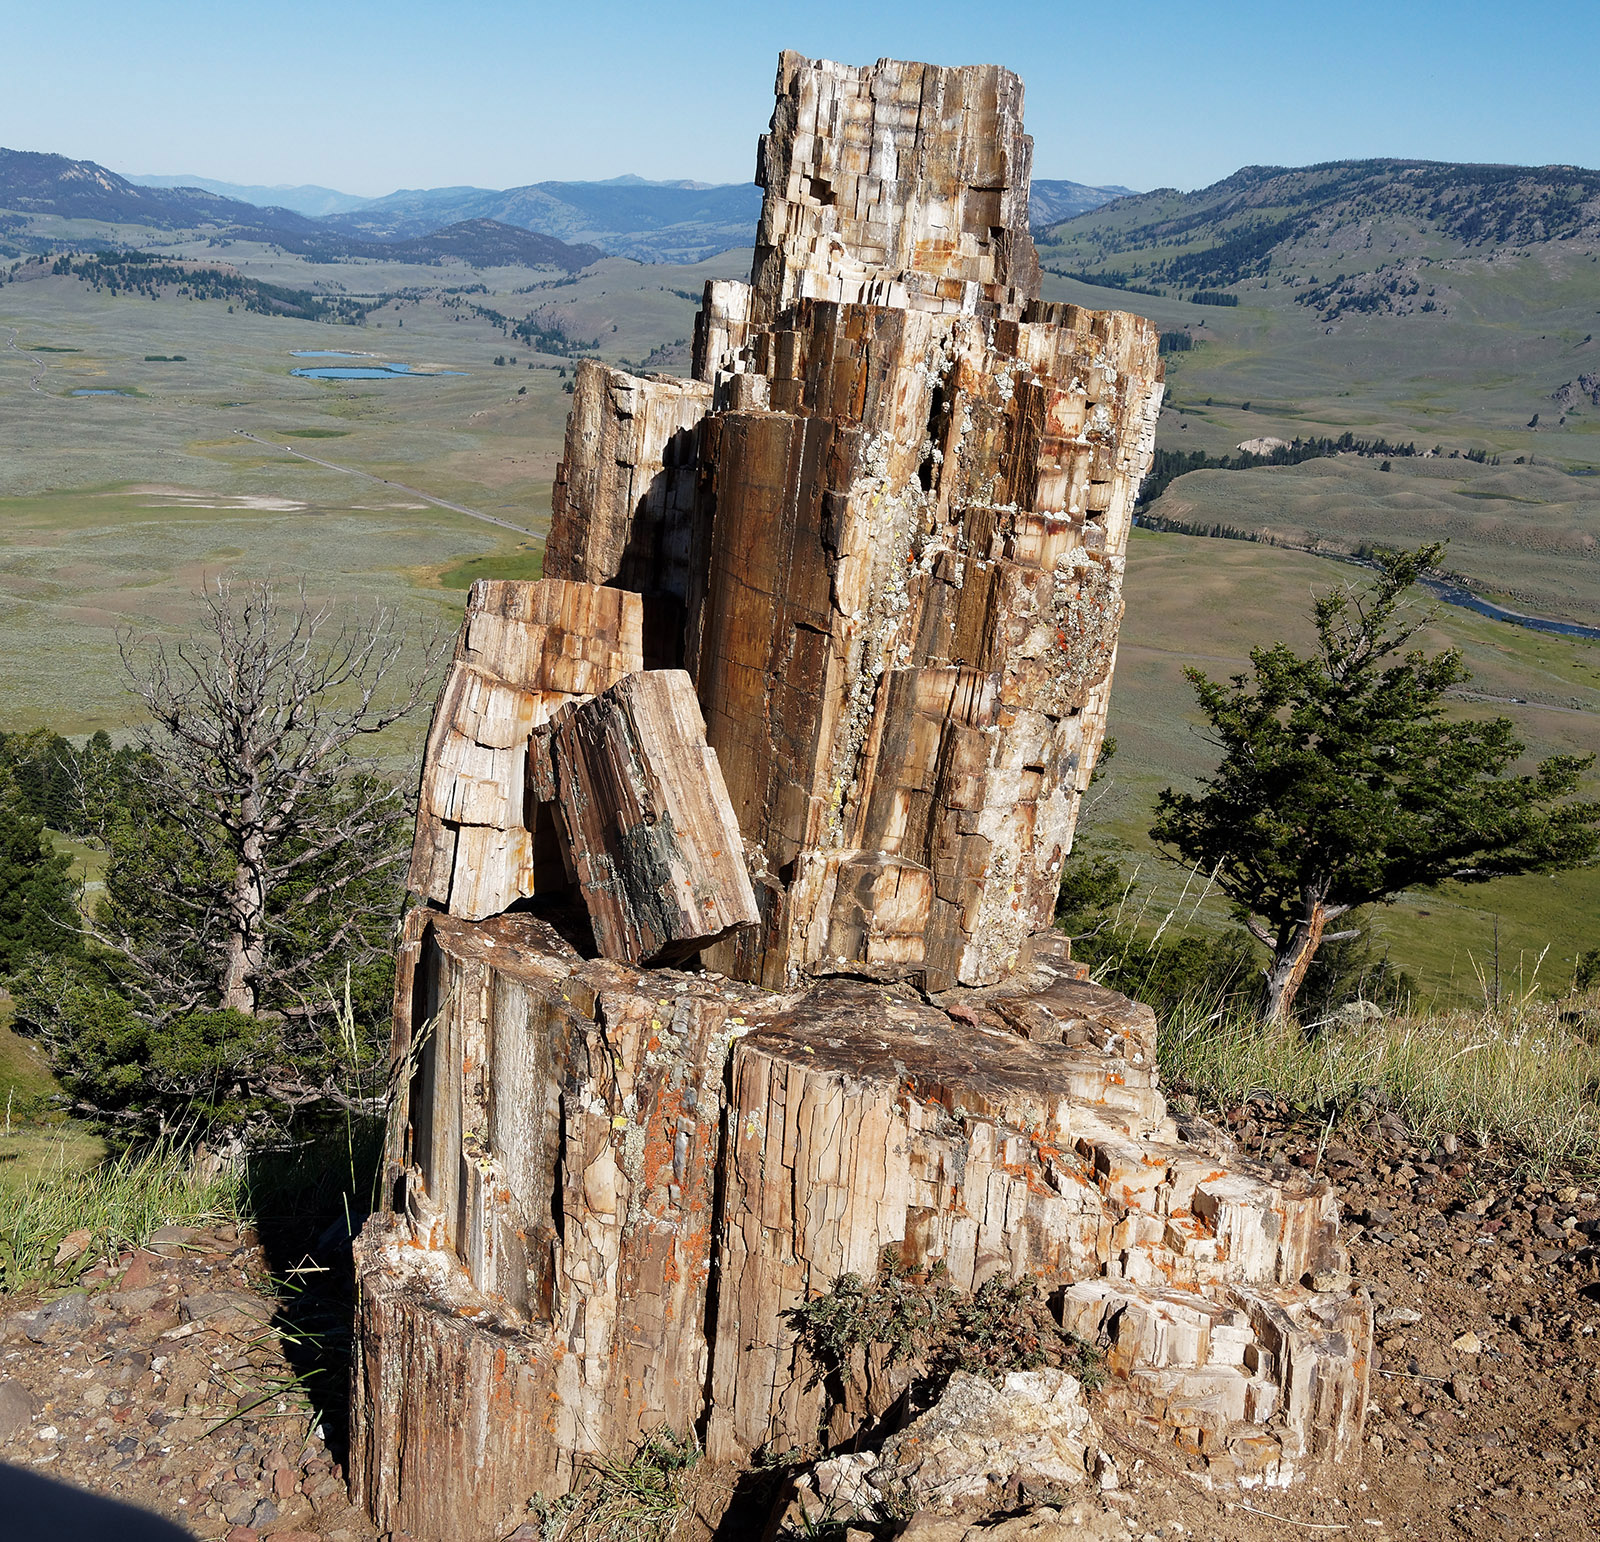 Petrified tree on Specimen ridge with a view over Lamar River Valley.  This and other trees in a forest 50 million years ago were buried rapidly in debris and conglomerate released by the Absaroka Volcanic Supergroup and dead wood components became infused/replaced by silica-rich chemicals.